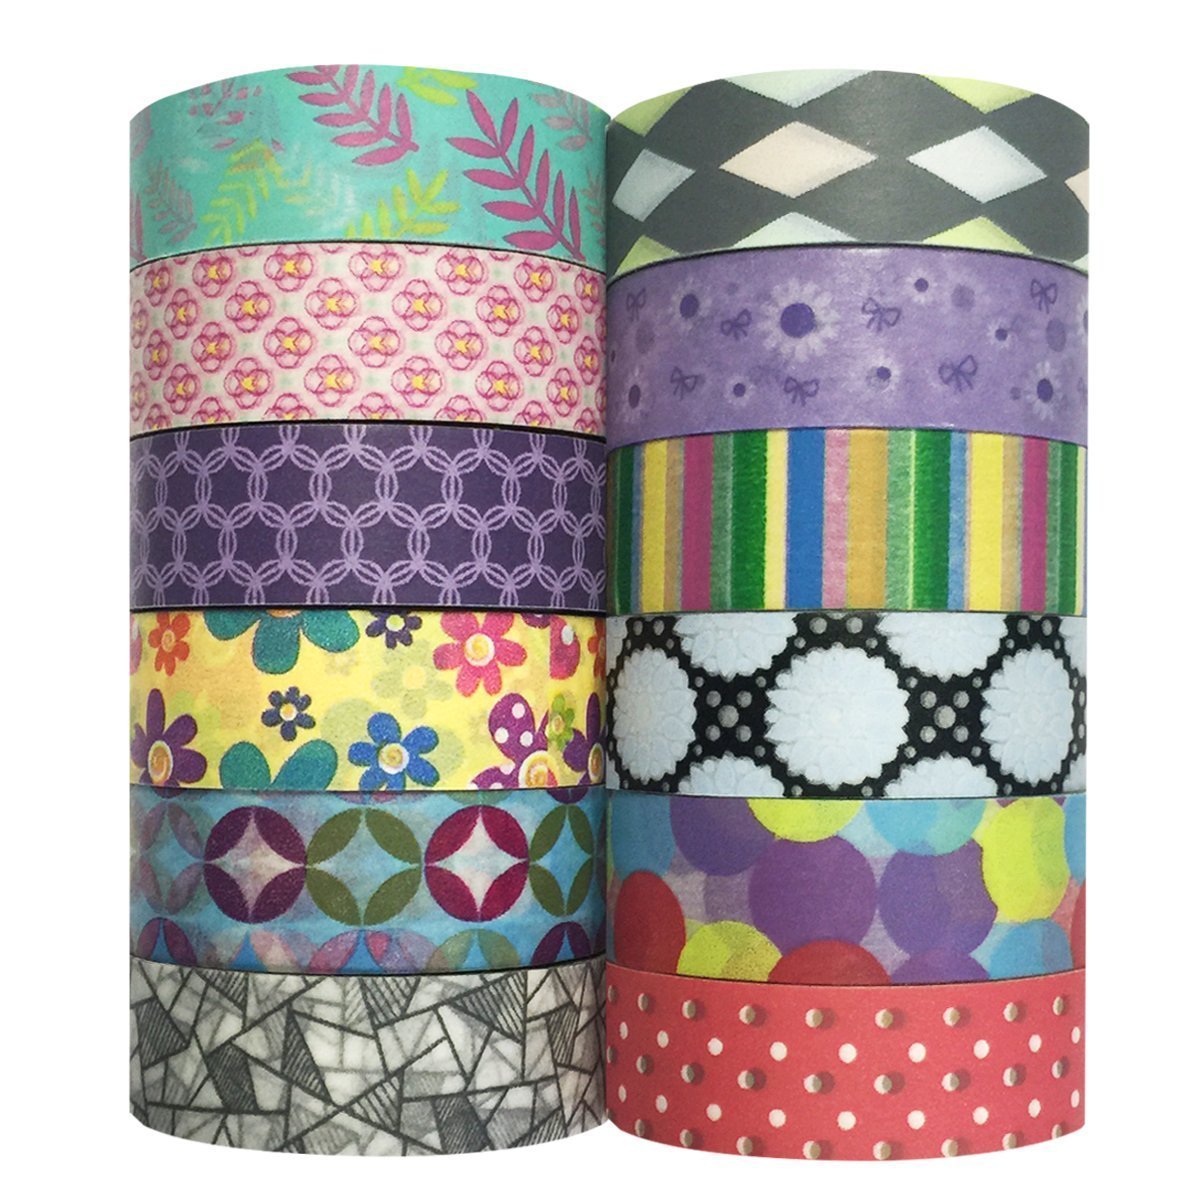 Wrapables Set of 12 Washi Tapes Decorative Masking Tapes + 20 Shimmer Tags